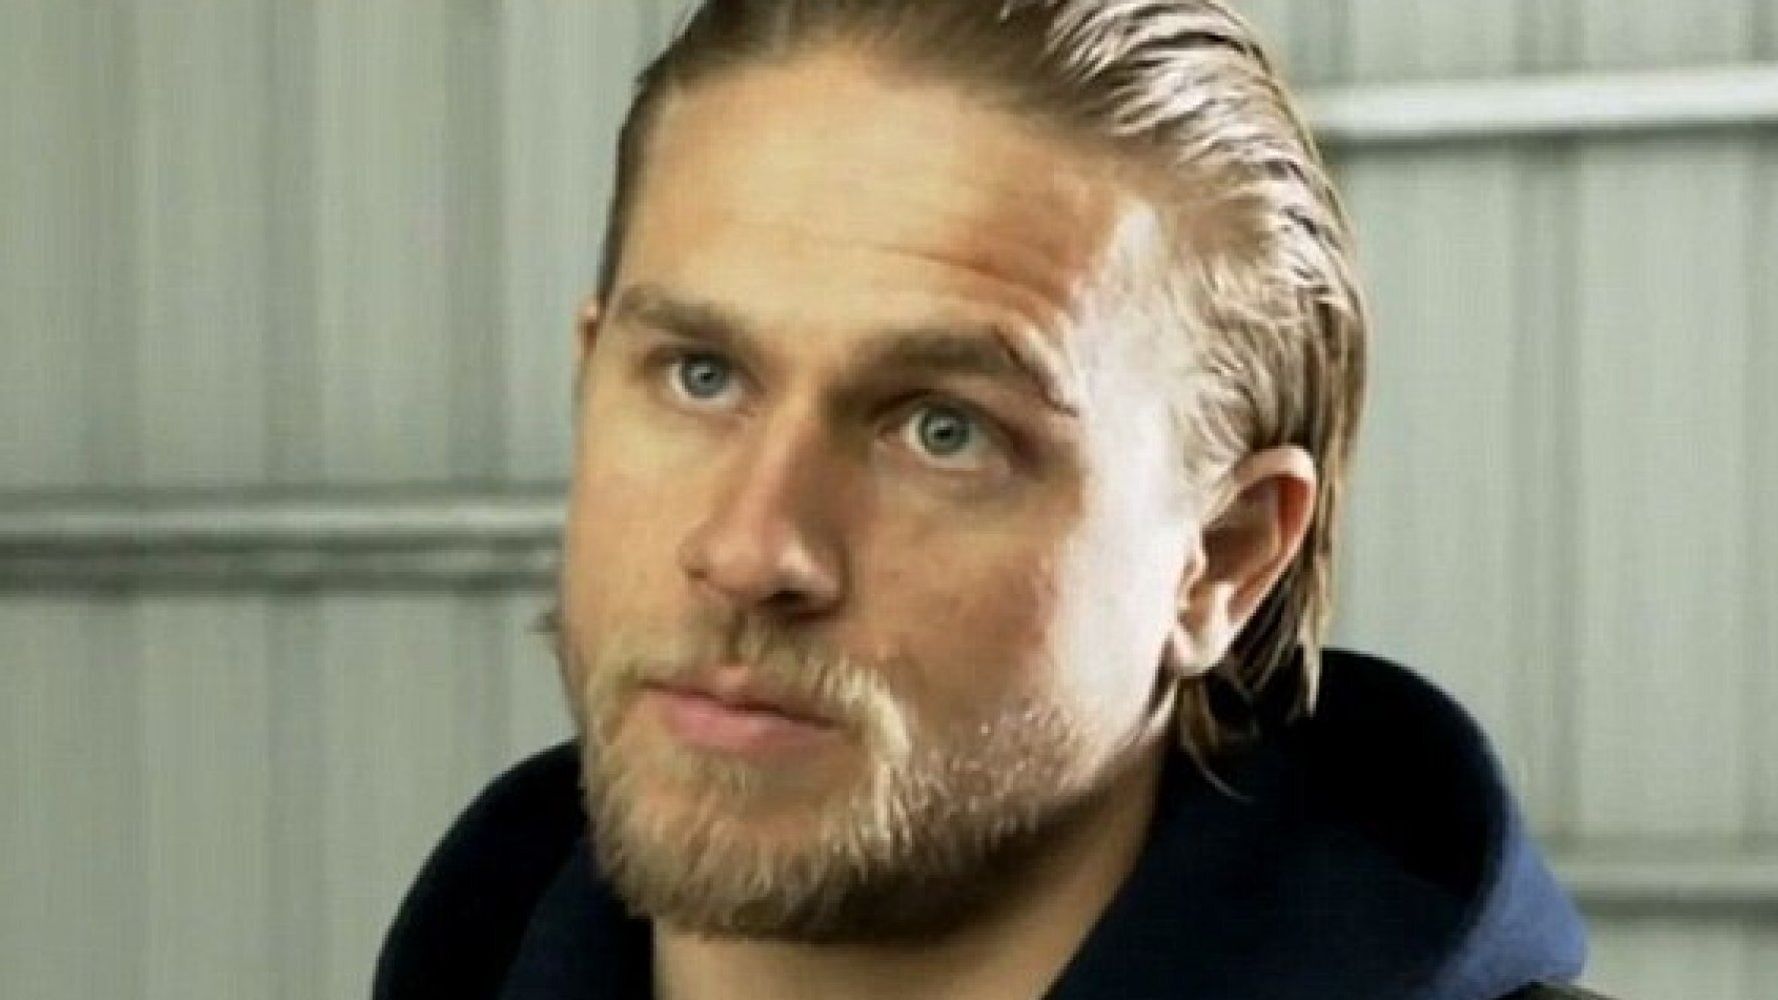 The Sons Of Anarchy Star Who Admits He Isn't Really A Fan Of Motorcycles